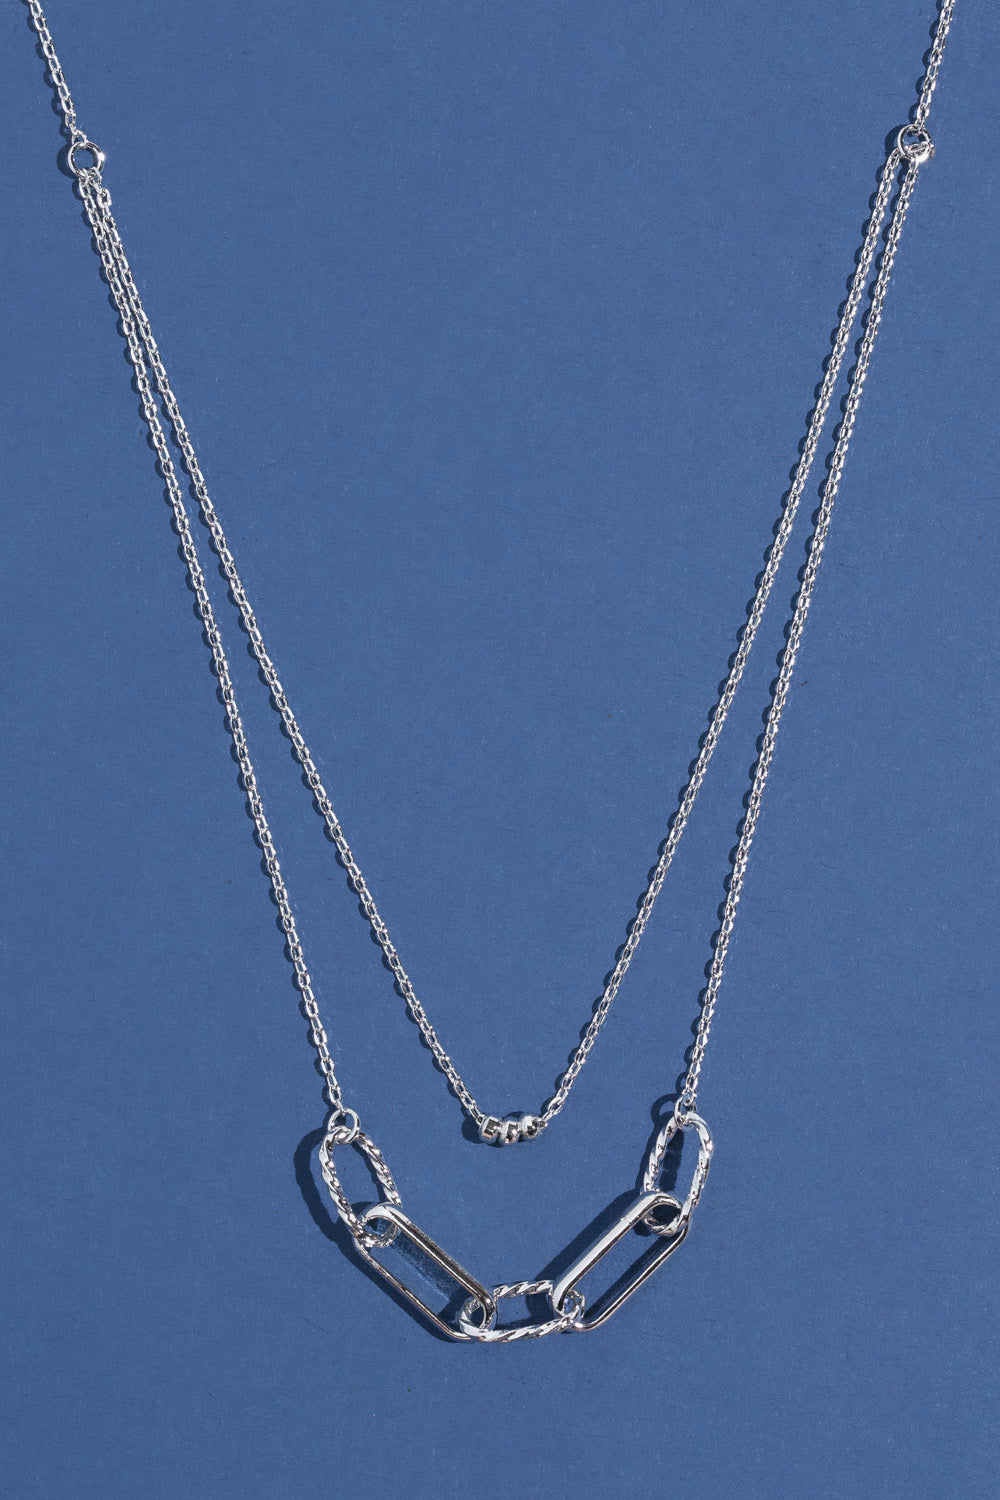 Steady Connection Necklace